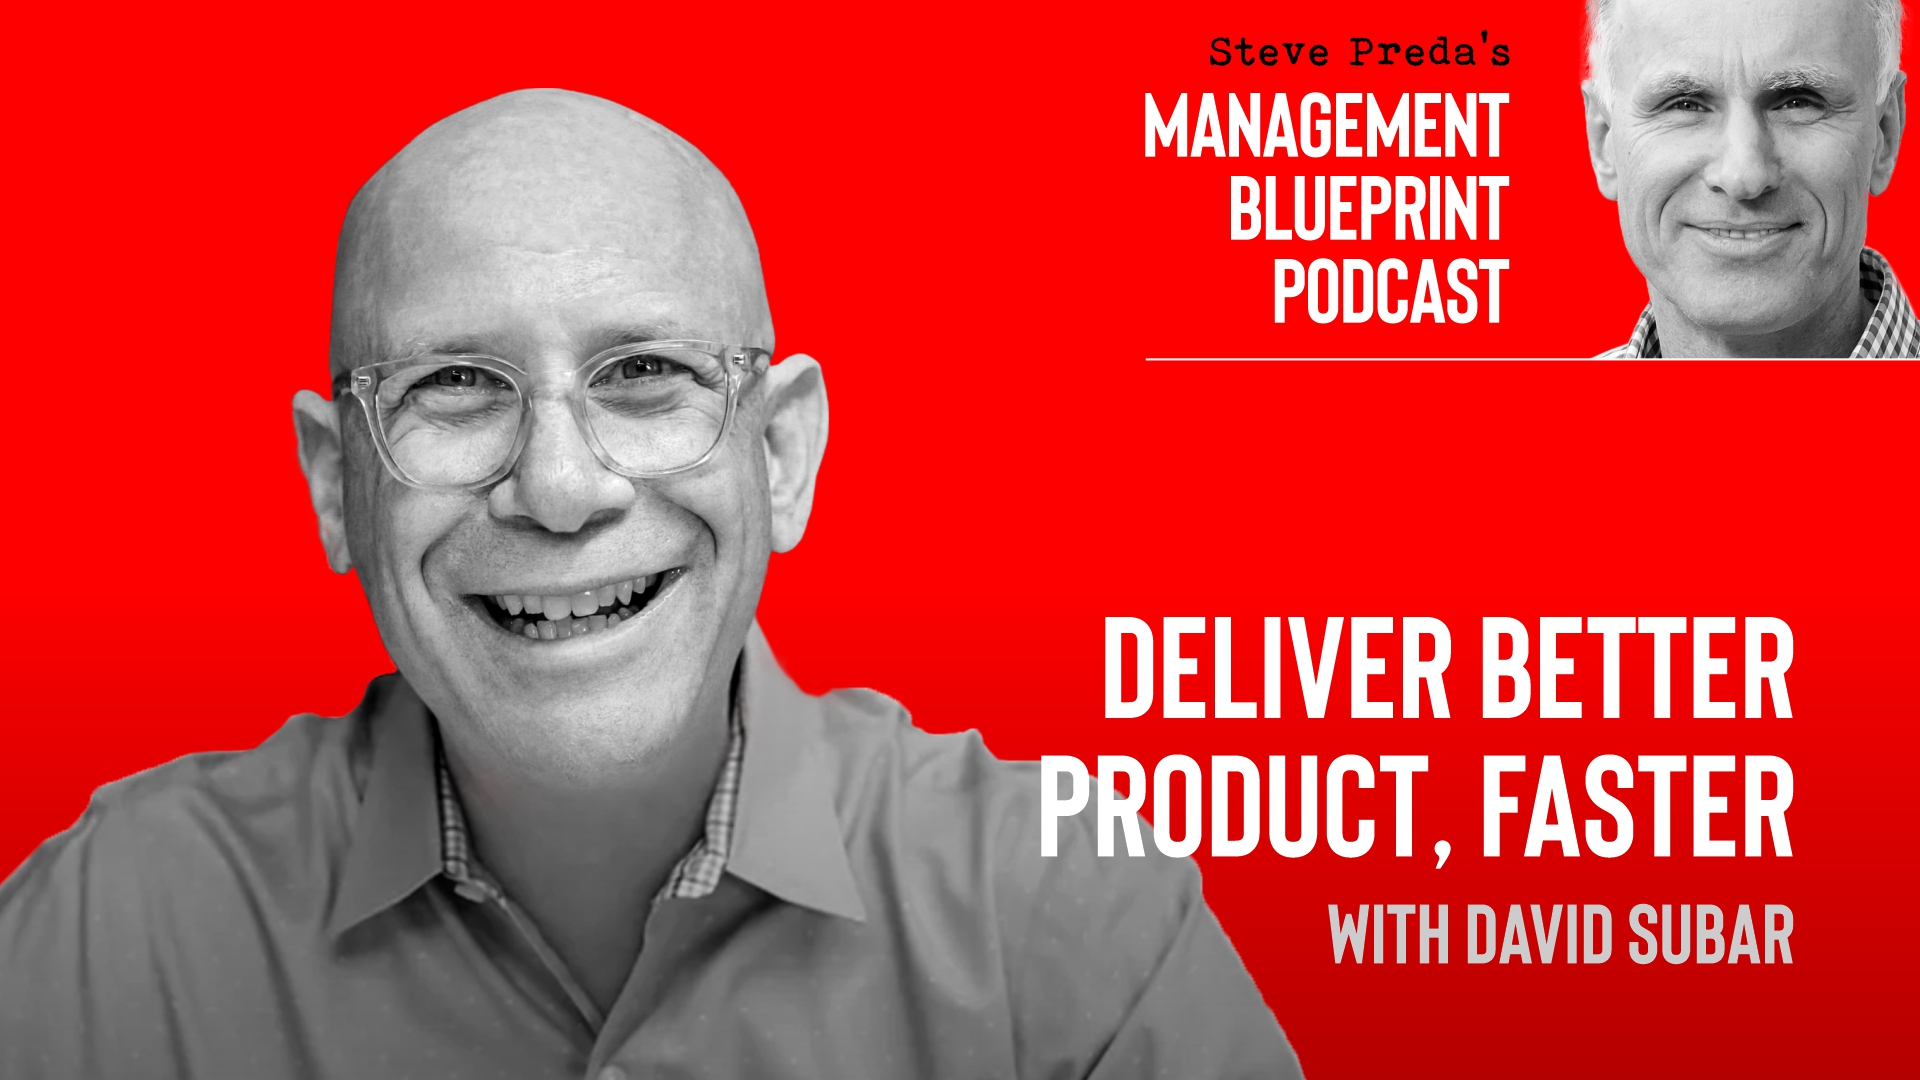 Deliver Better Product, Faster with David Subar